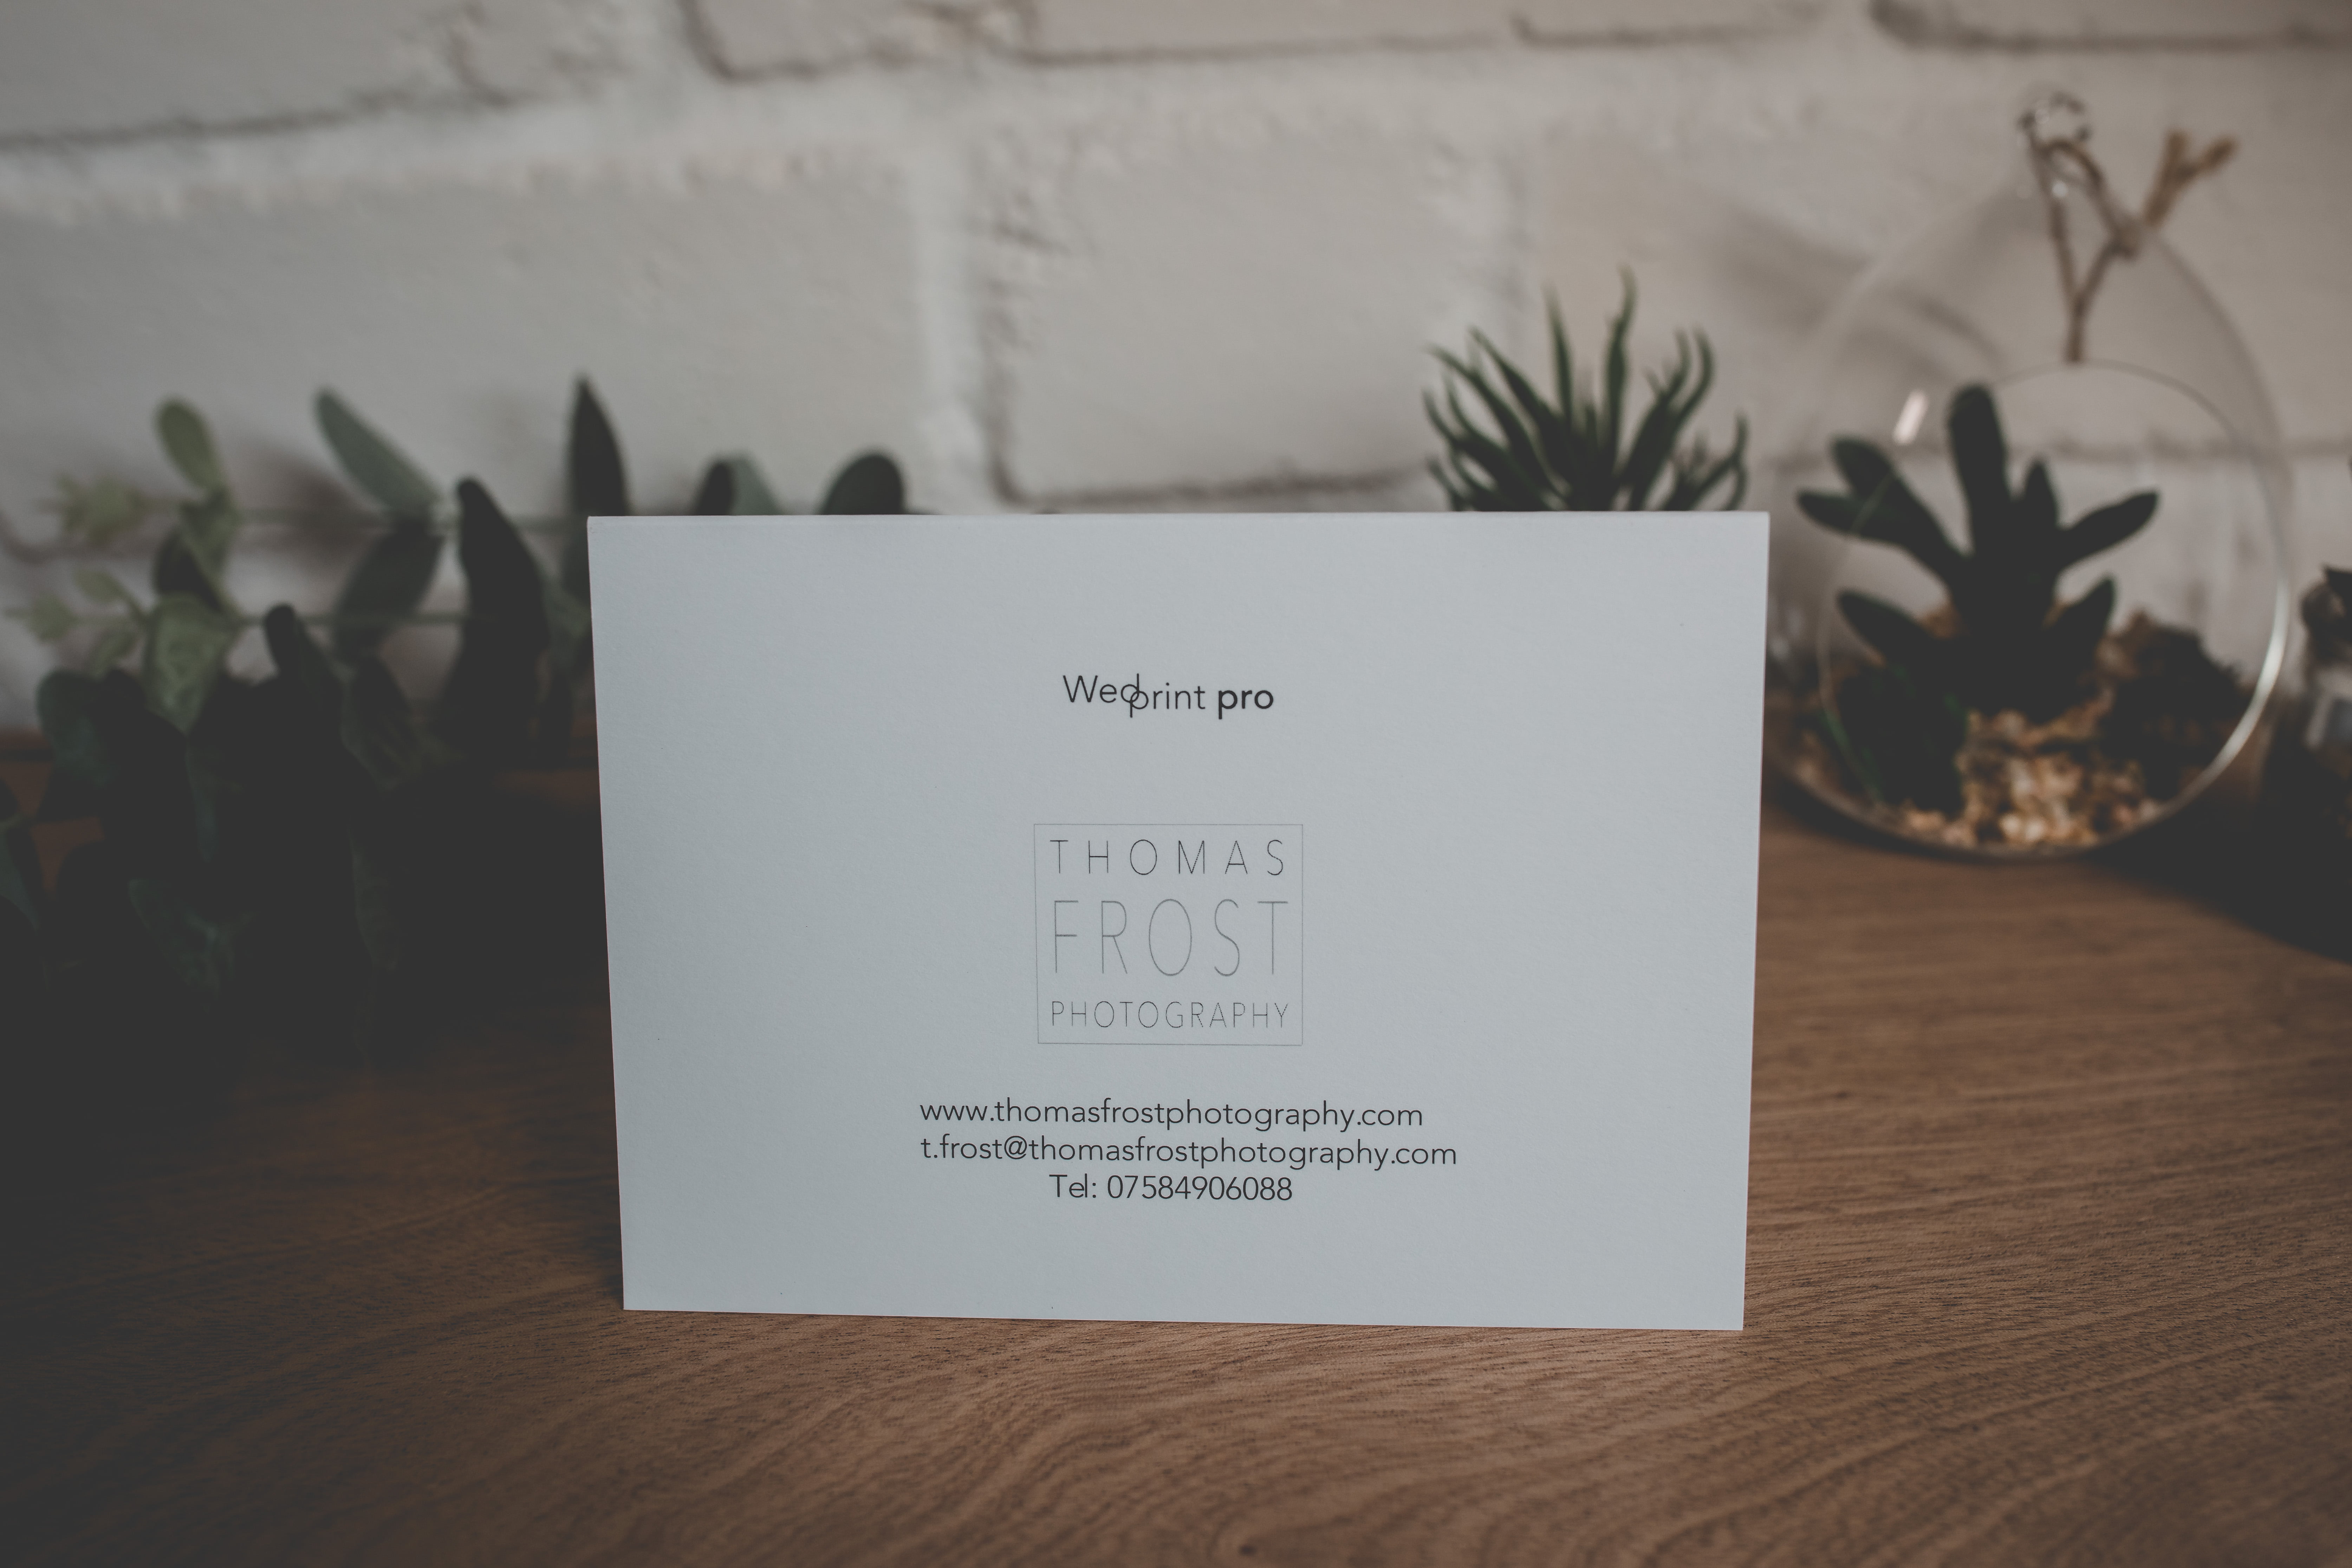 branding for photographer on thank you card